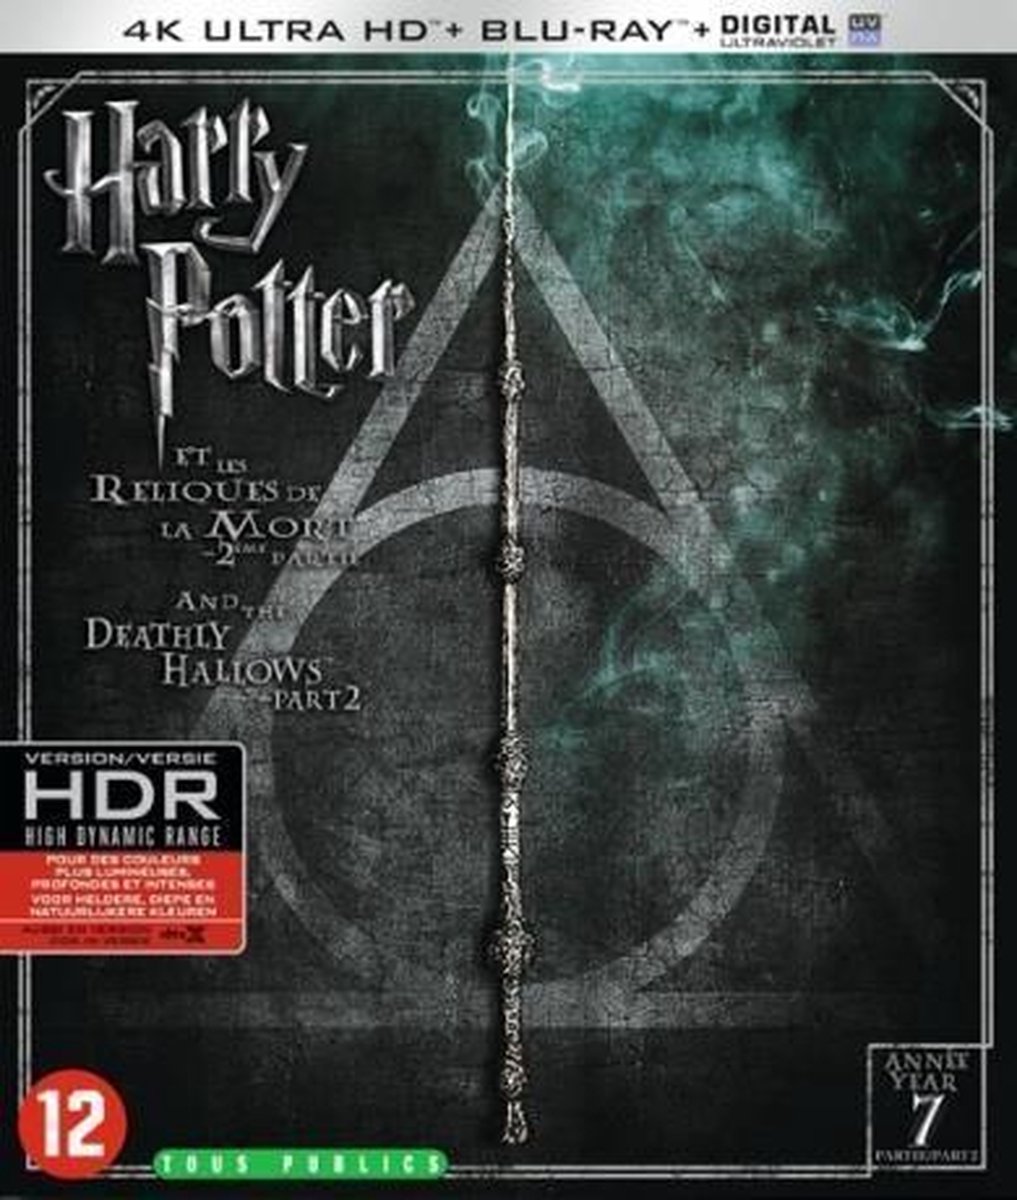 Harry Potter Year 7 - The Deathly Hallows Part 2 (4K Ultra HD Blu-ray)-